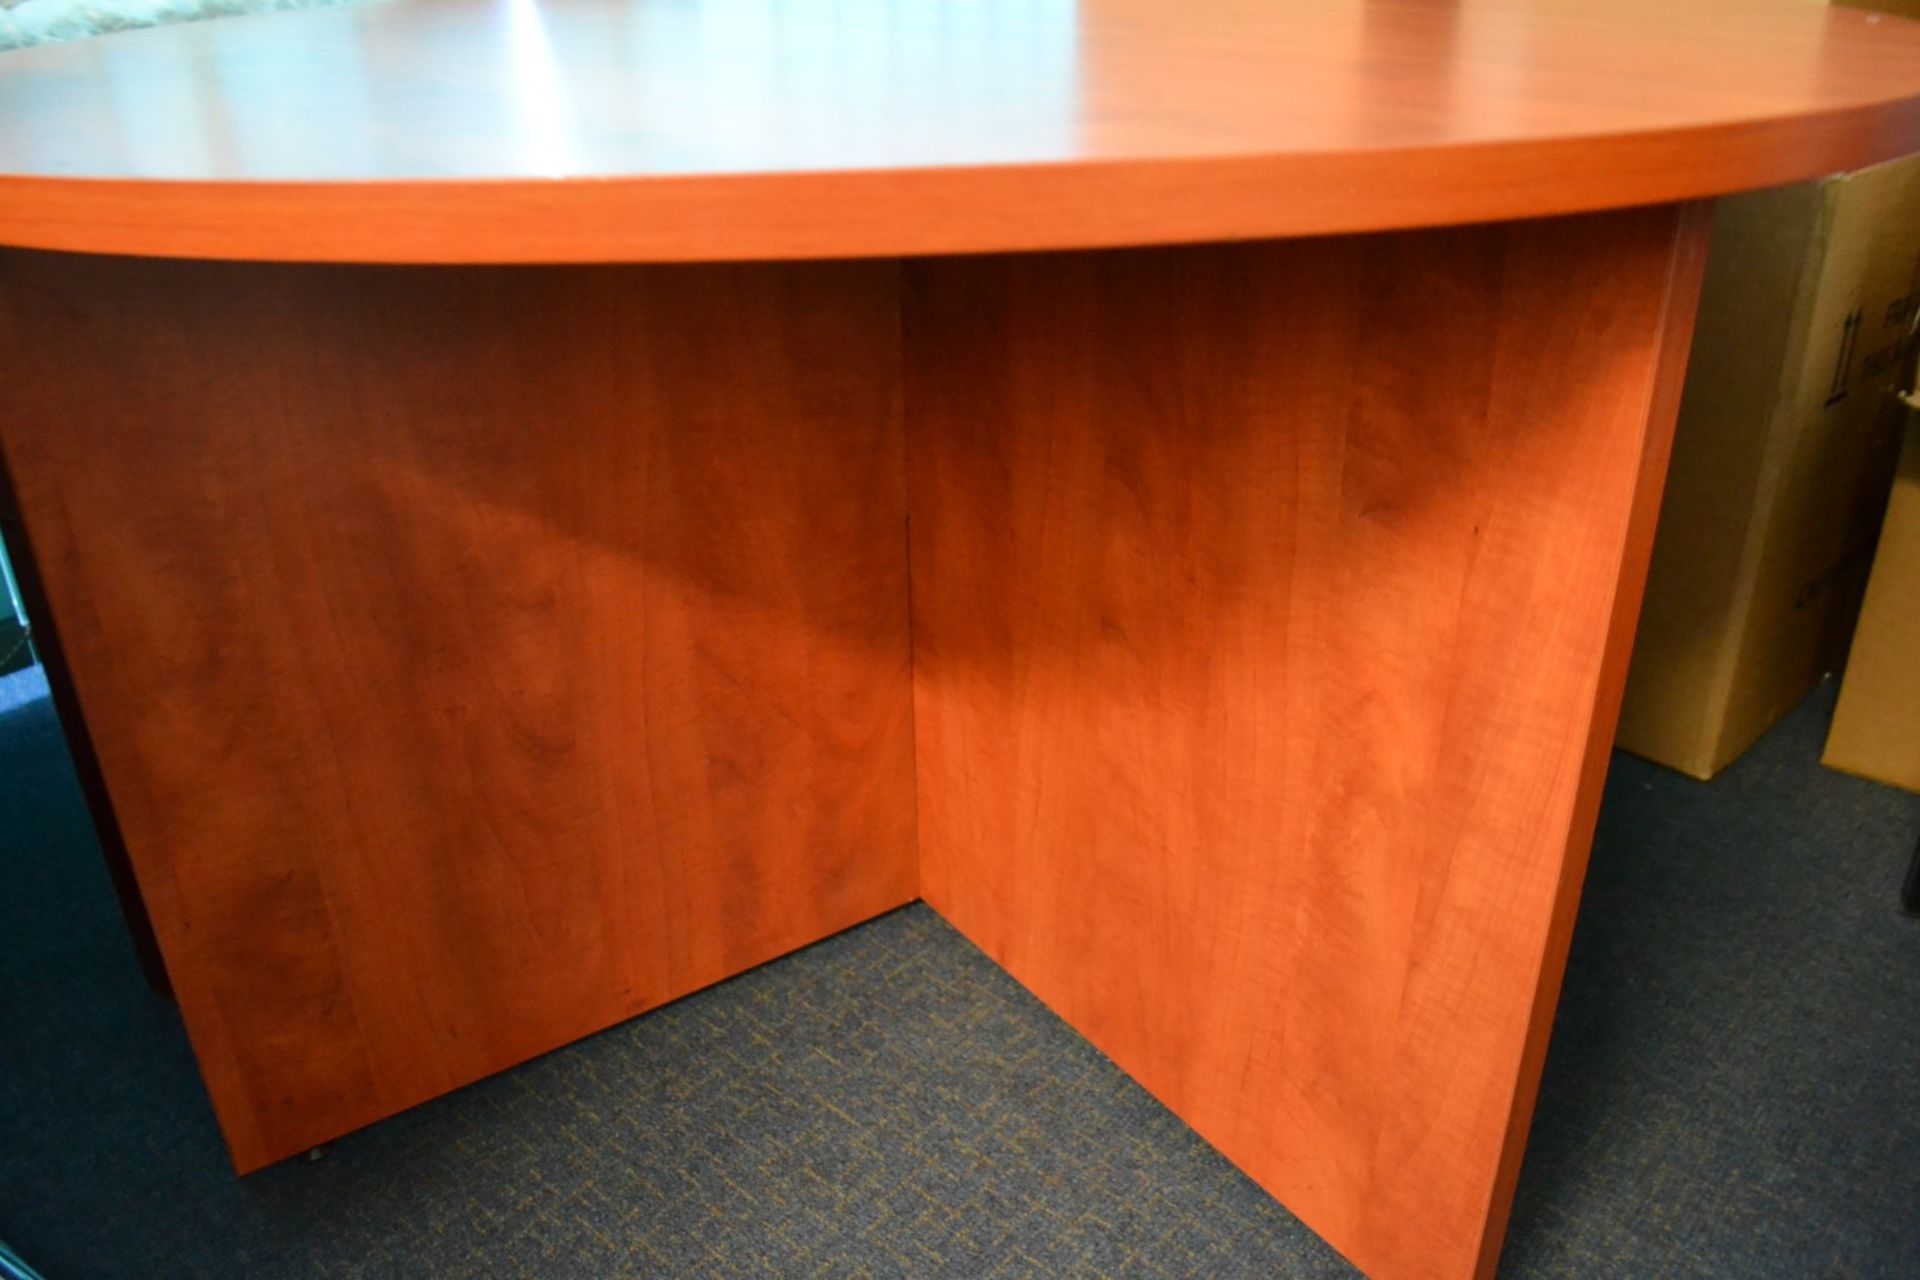 1 x Walnut Office Furniture Set - Ref: VM556/A16 B1 - CL409 - Location: Wakefield WF16 - Used In - Image 7 of 9